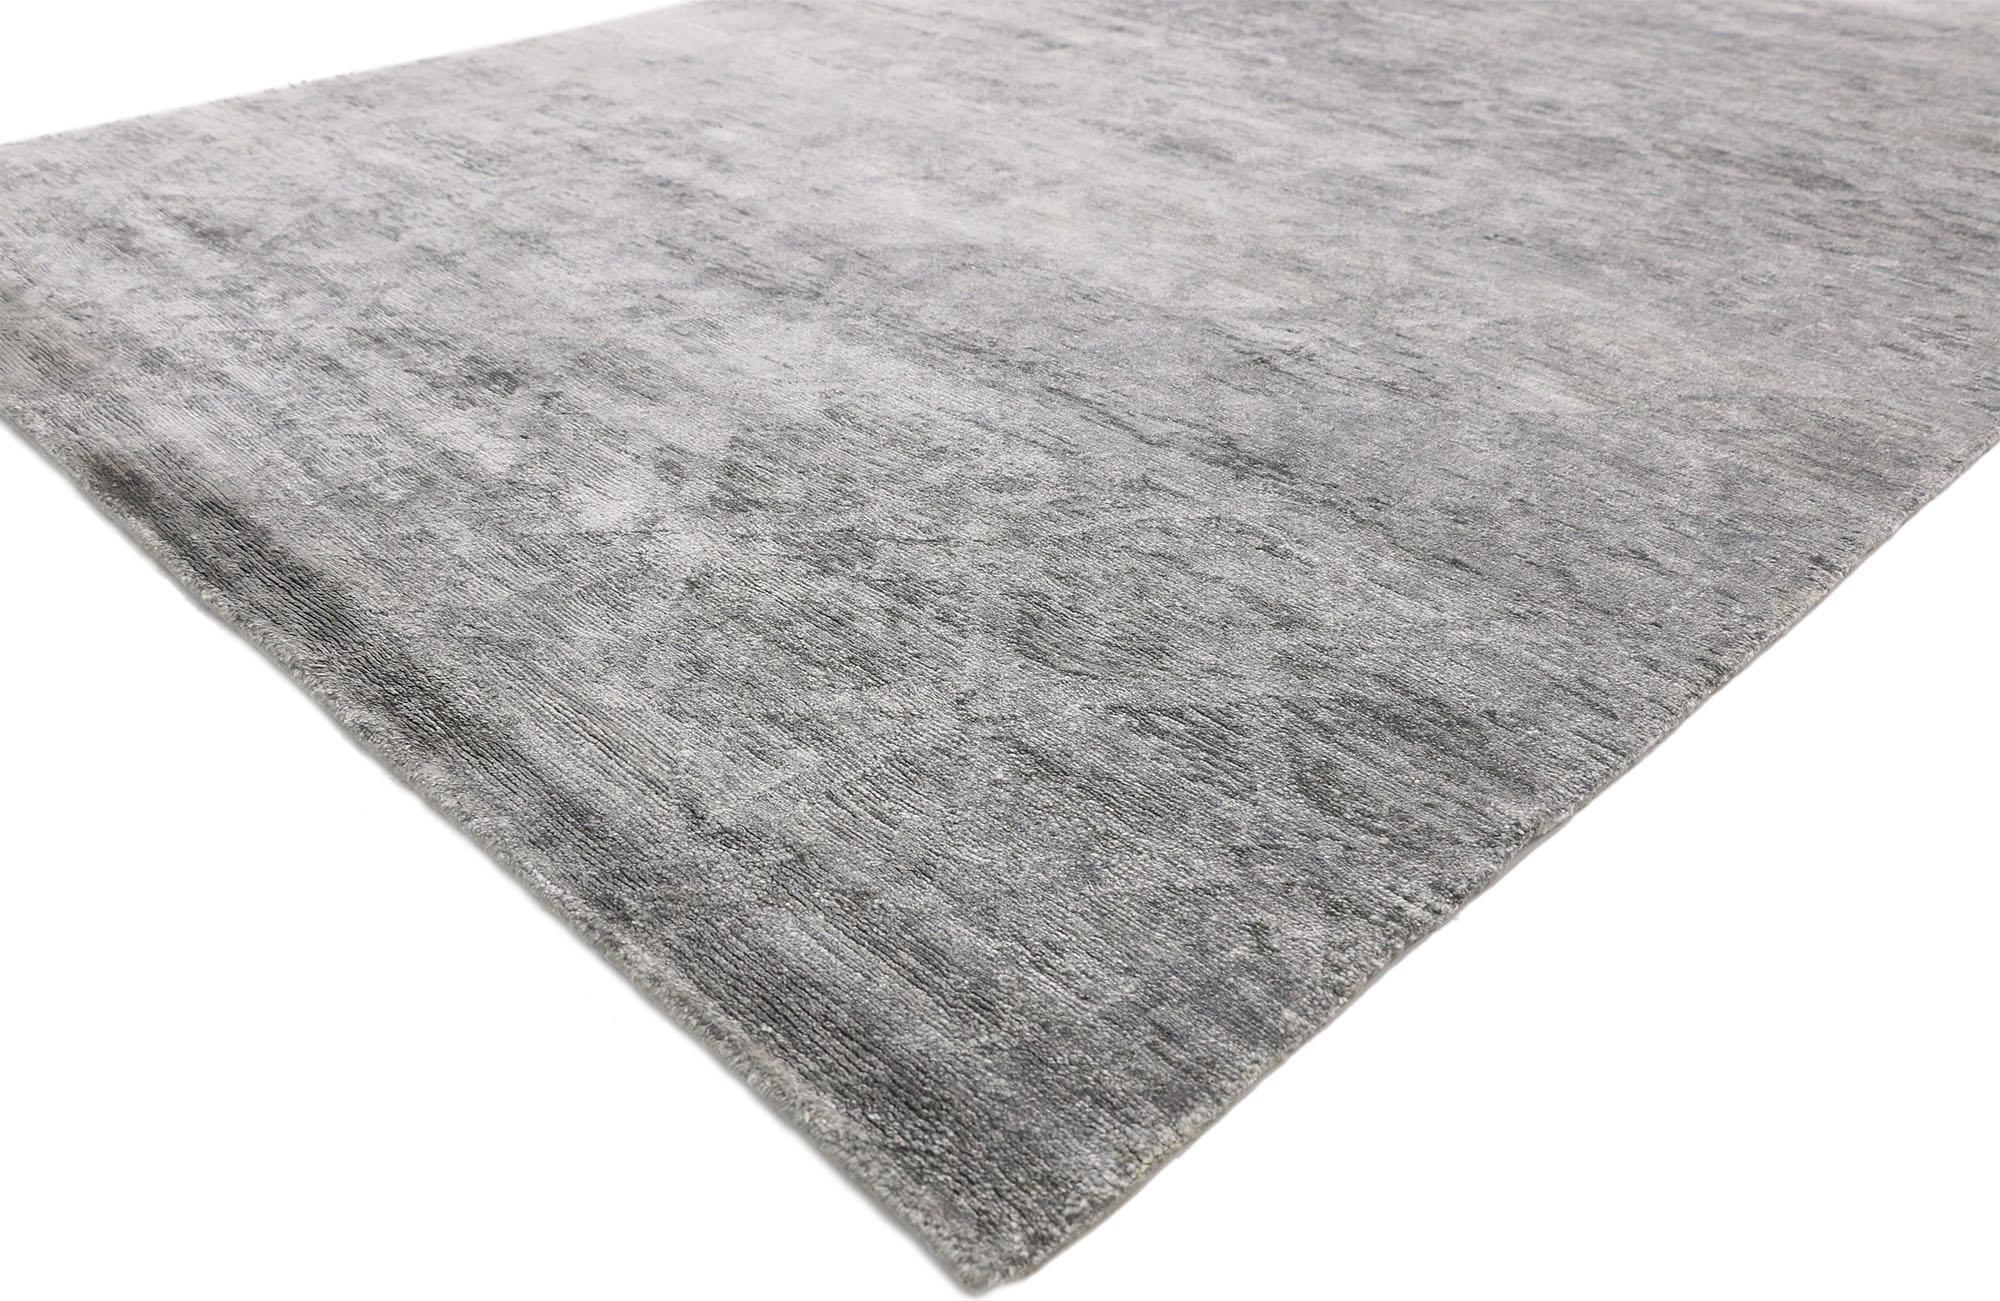 30465, Contemporary Gray Area Rug with Scandi-Modern and New Nordic Style 06'01 x 09'02. This hand knotted wool contemporary area rug features a subtle all-over diamond lattice pattern spread across an abrashed gray field. Graceful floral detailing